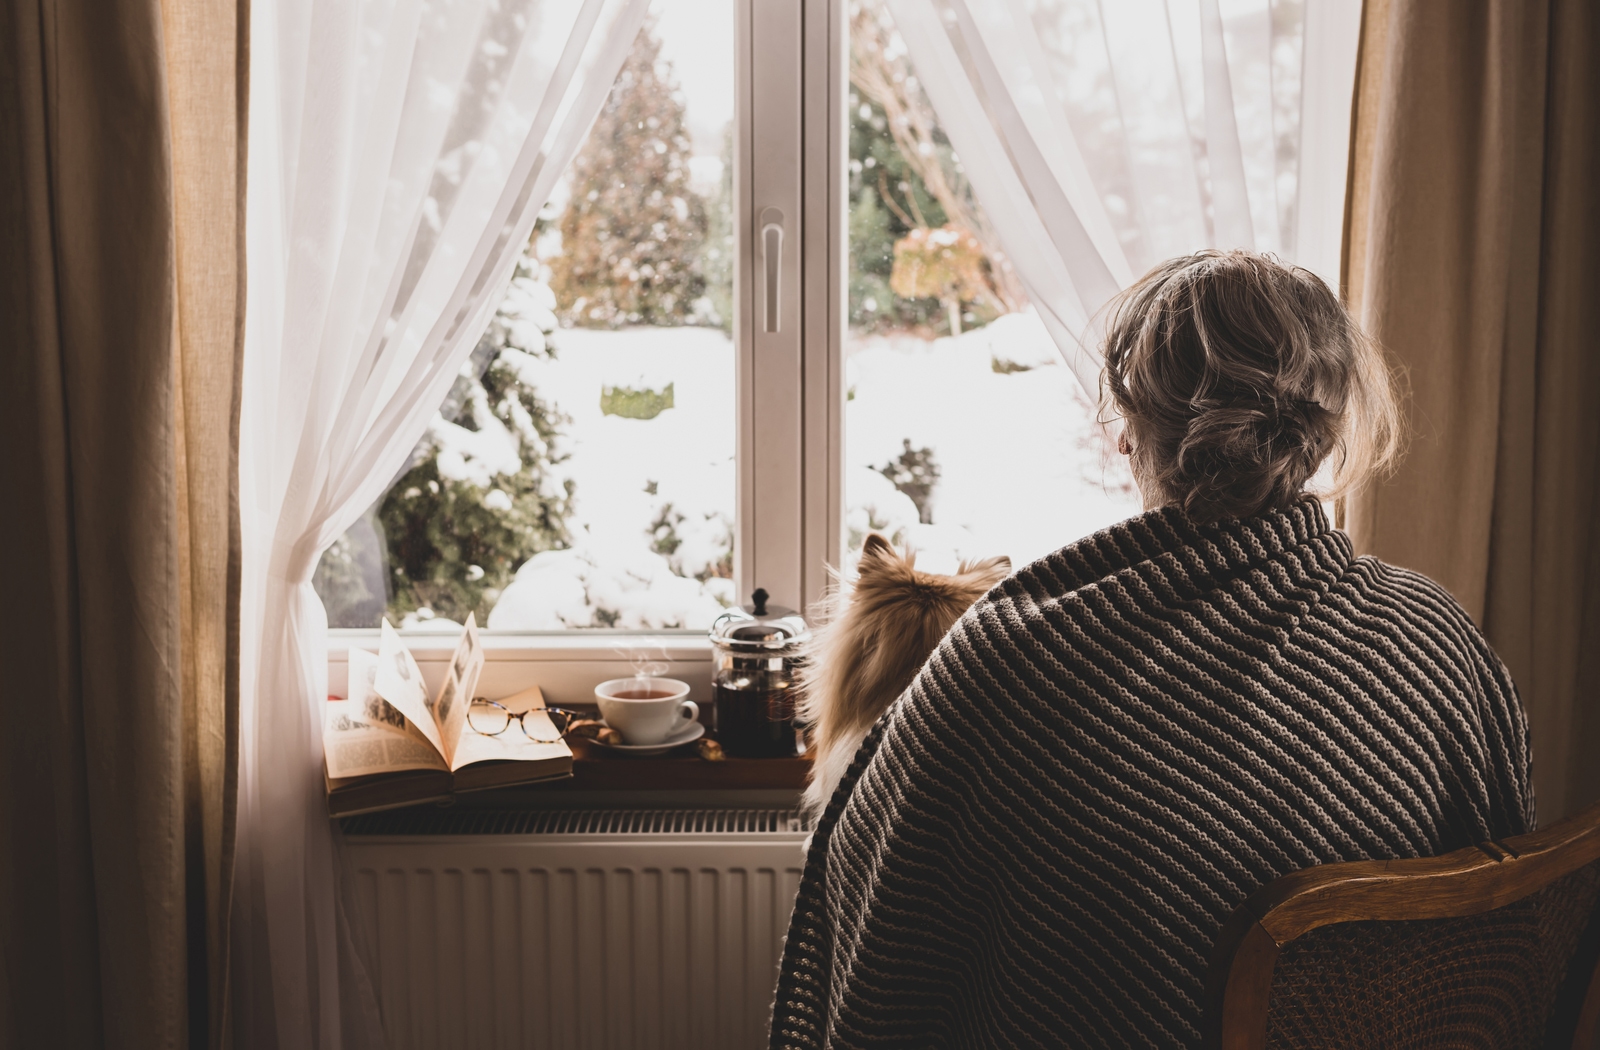 A view from behind a senior woman wrapped in a blanket, looking out the window during the winter time suffering from Seasonal Affective Disorder